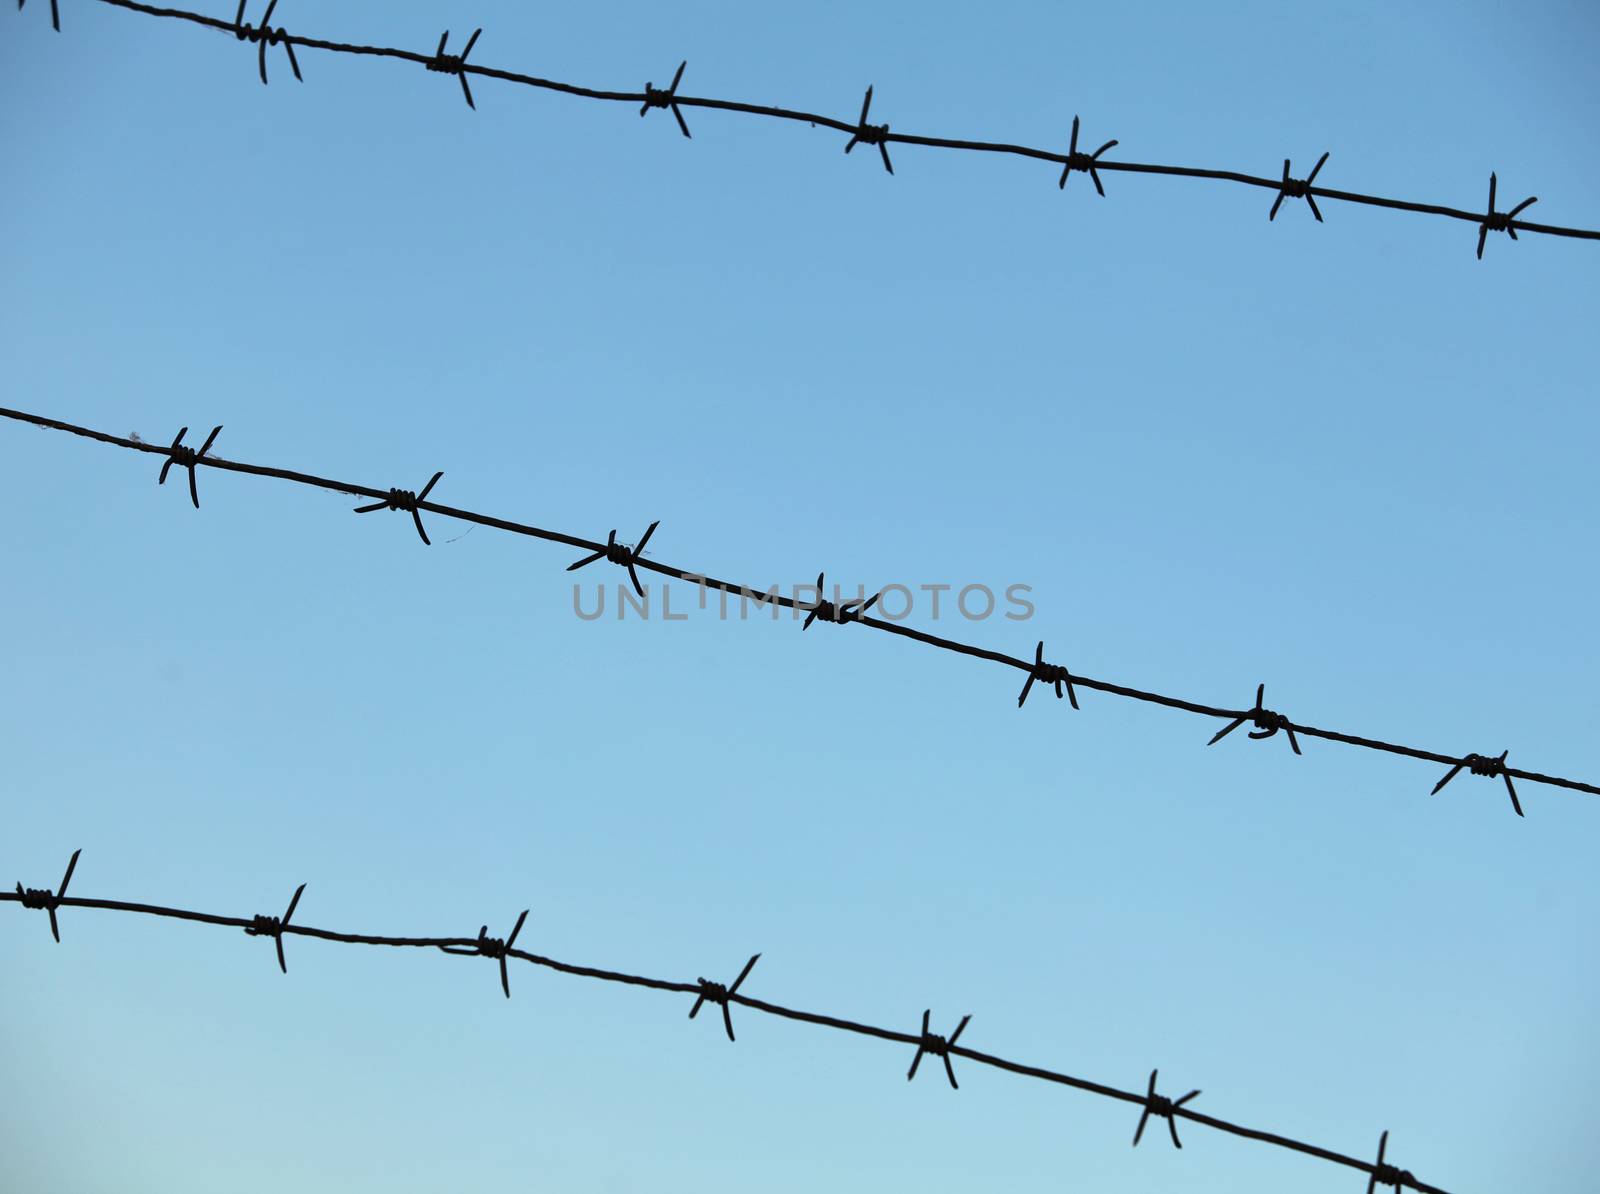 sky is enclosed by sharp barbed wire fence